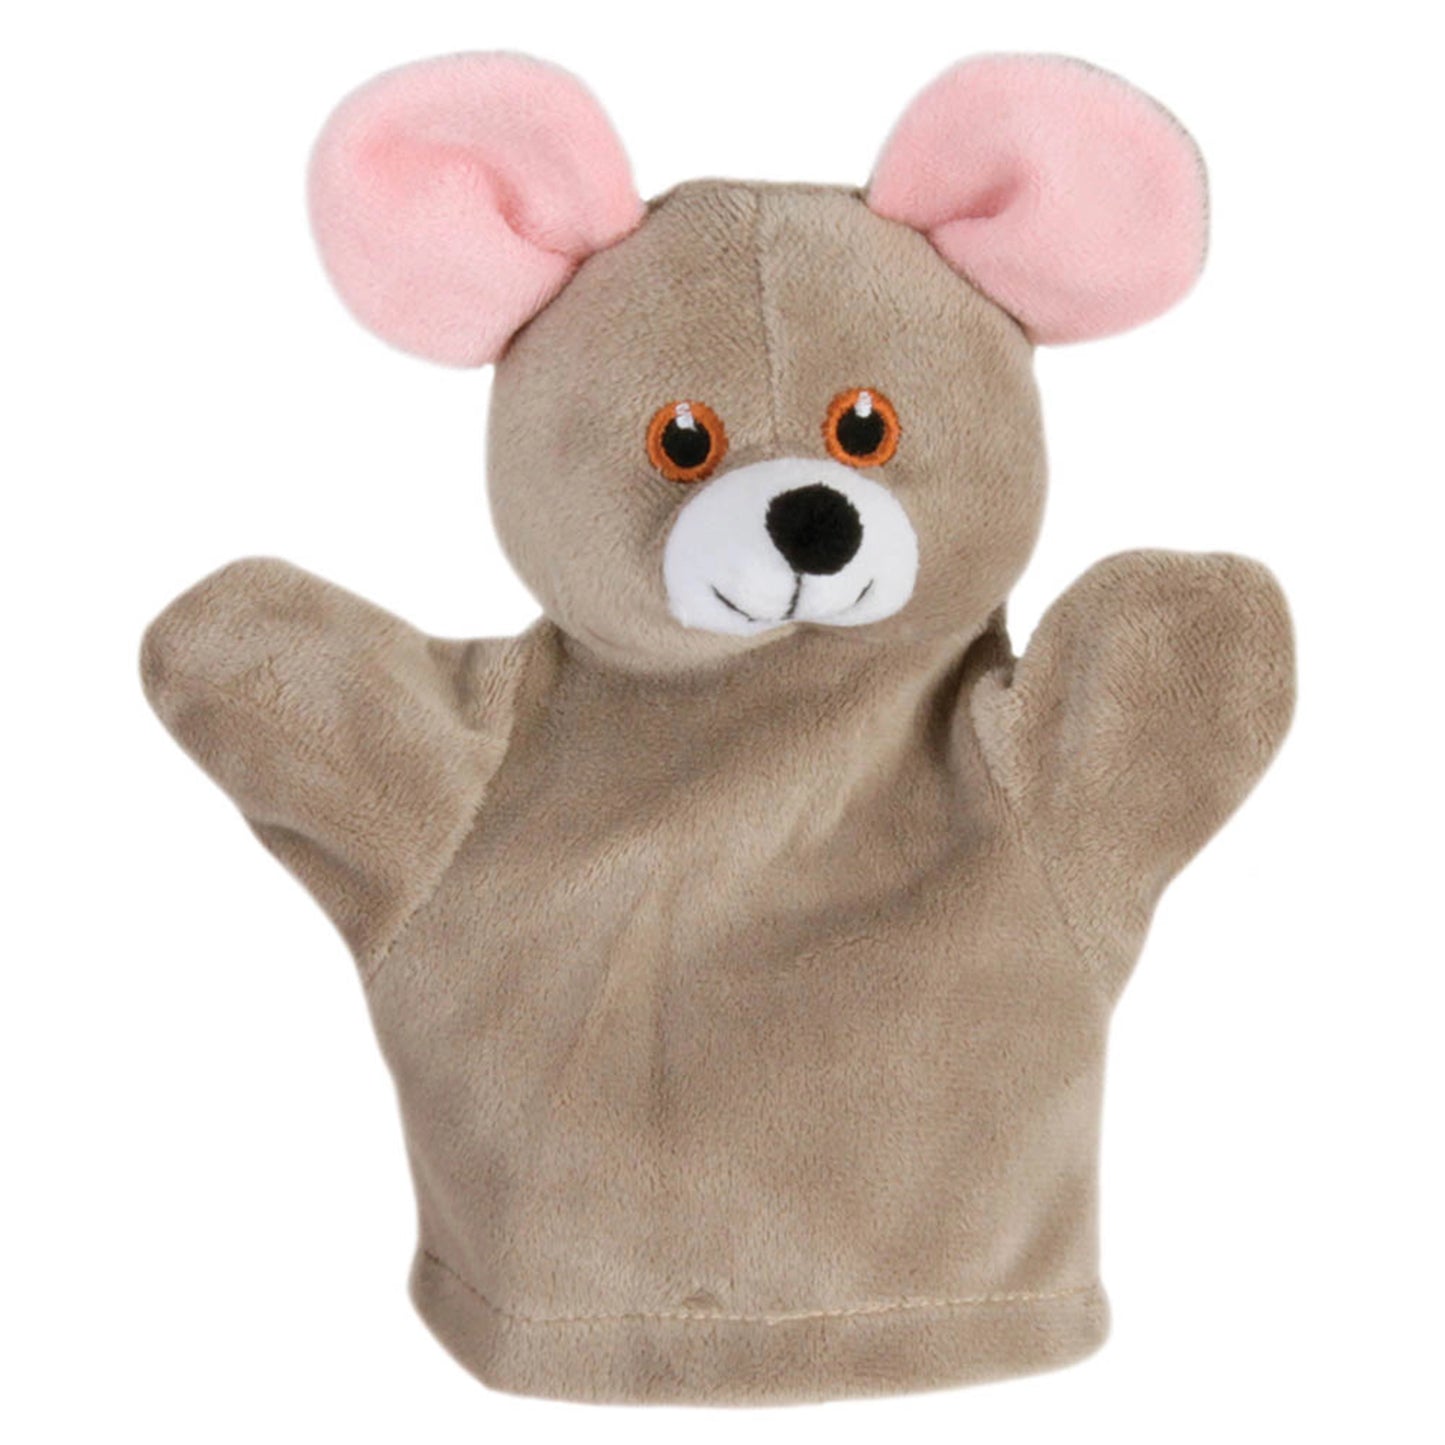 My First Puppet - Mouse - The Puppet Company - The Forgotten Toy Shop